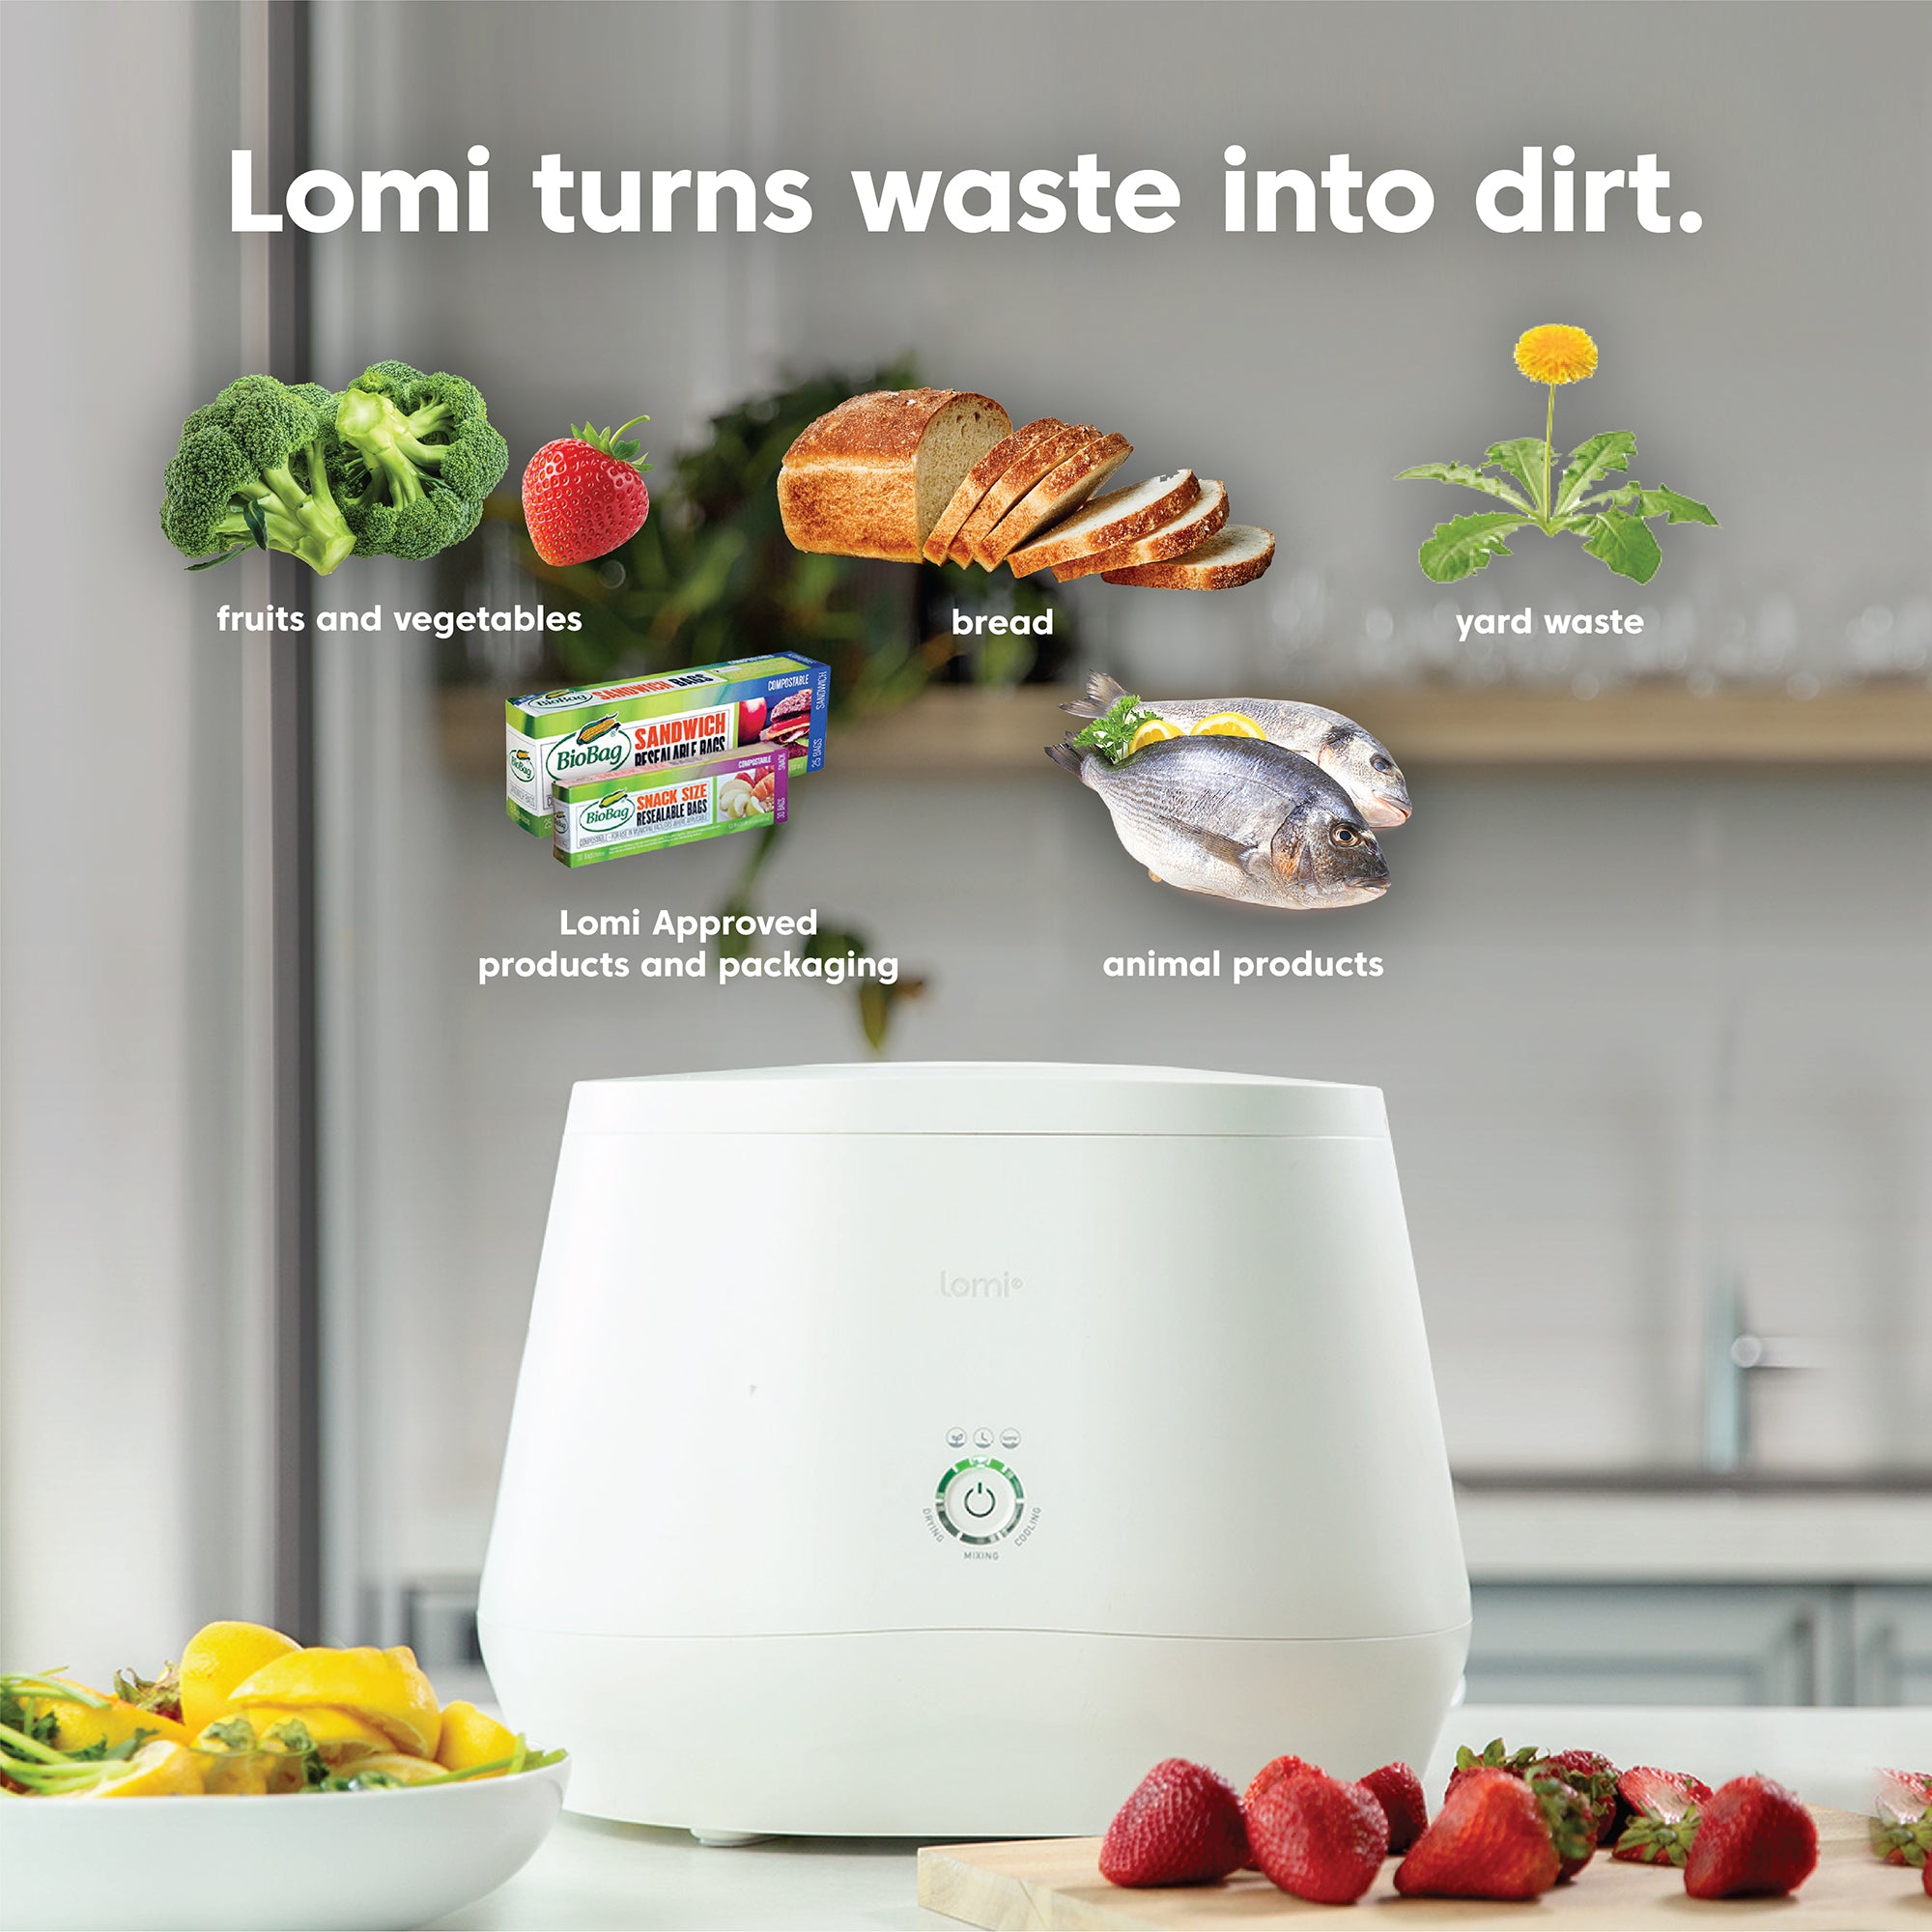 Lomi turns waste into dirt